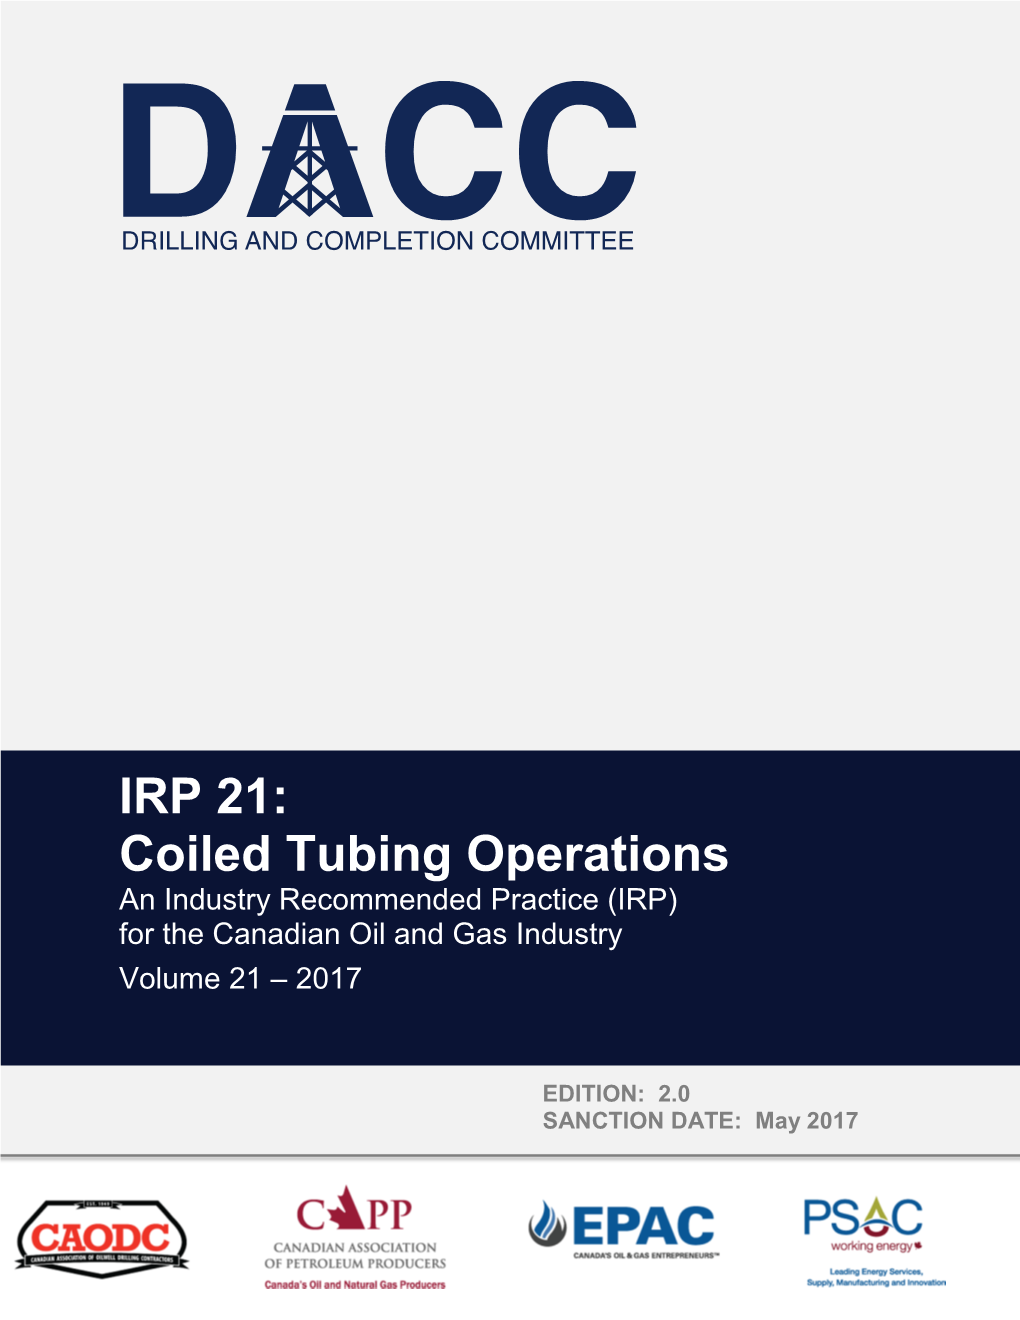 Coiled Tubing Operations an Industry Recommended Practice (IRP) for the Canadian Oil and Gas Industry Volume 21 – 2017